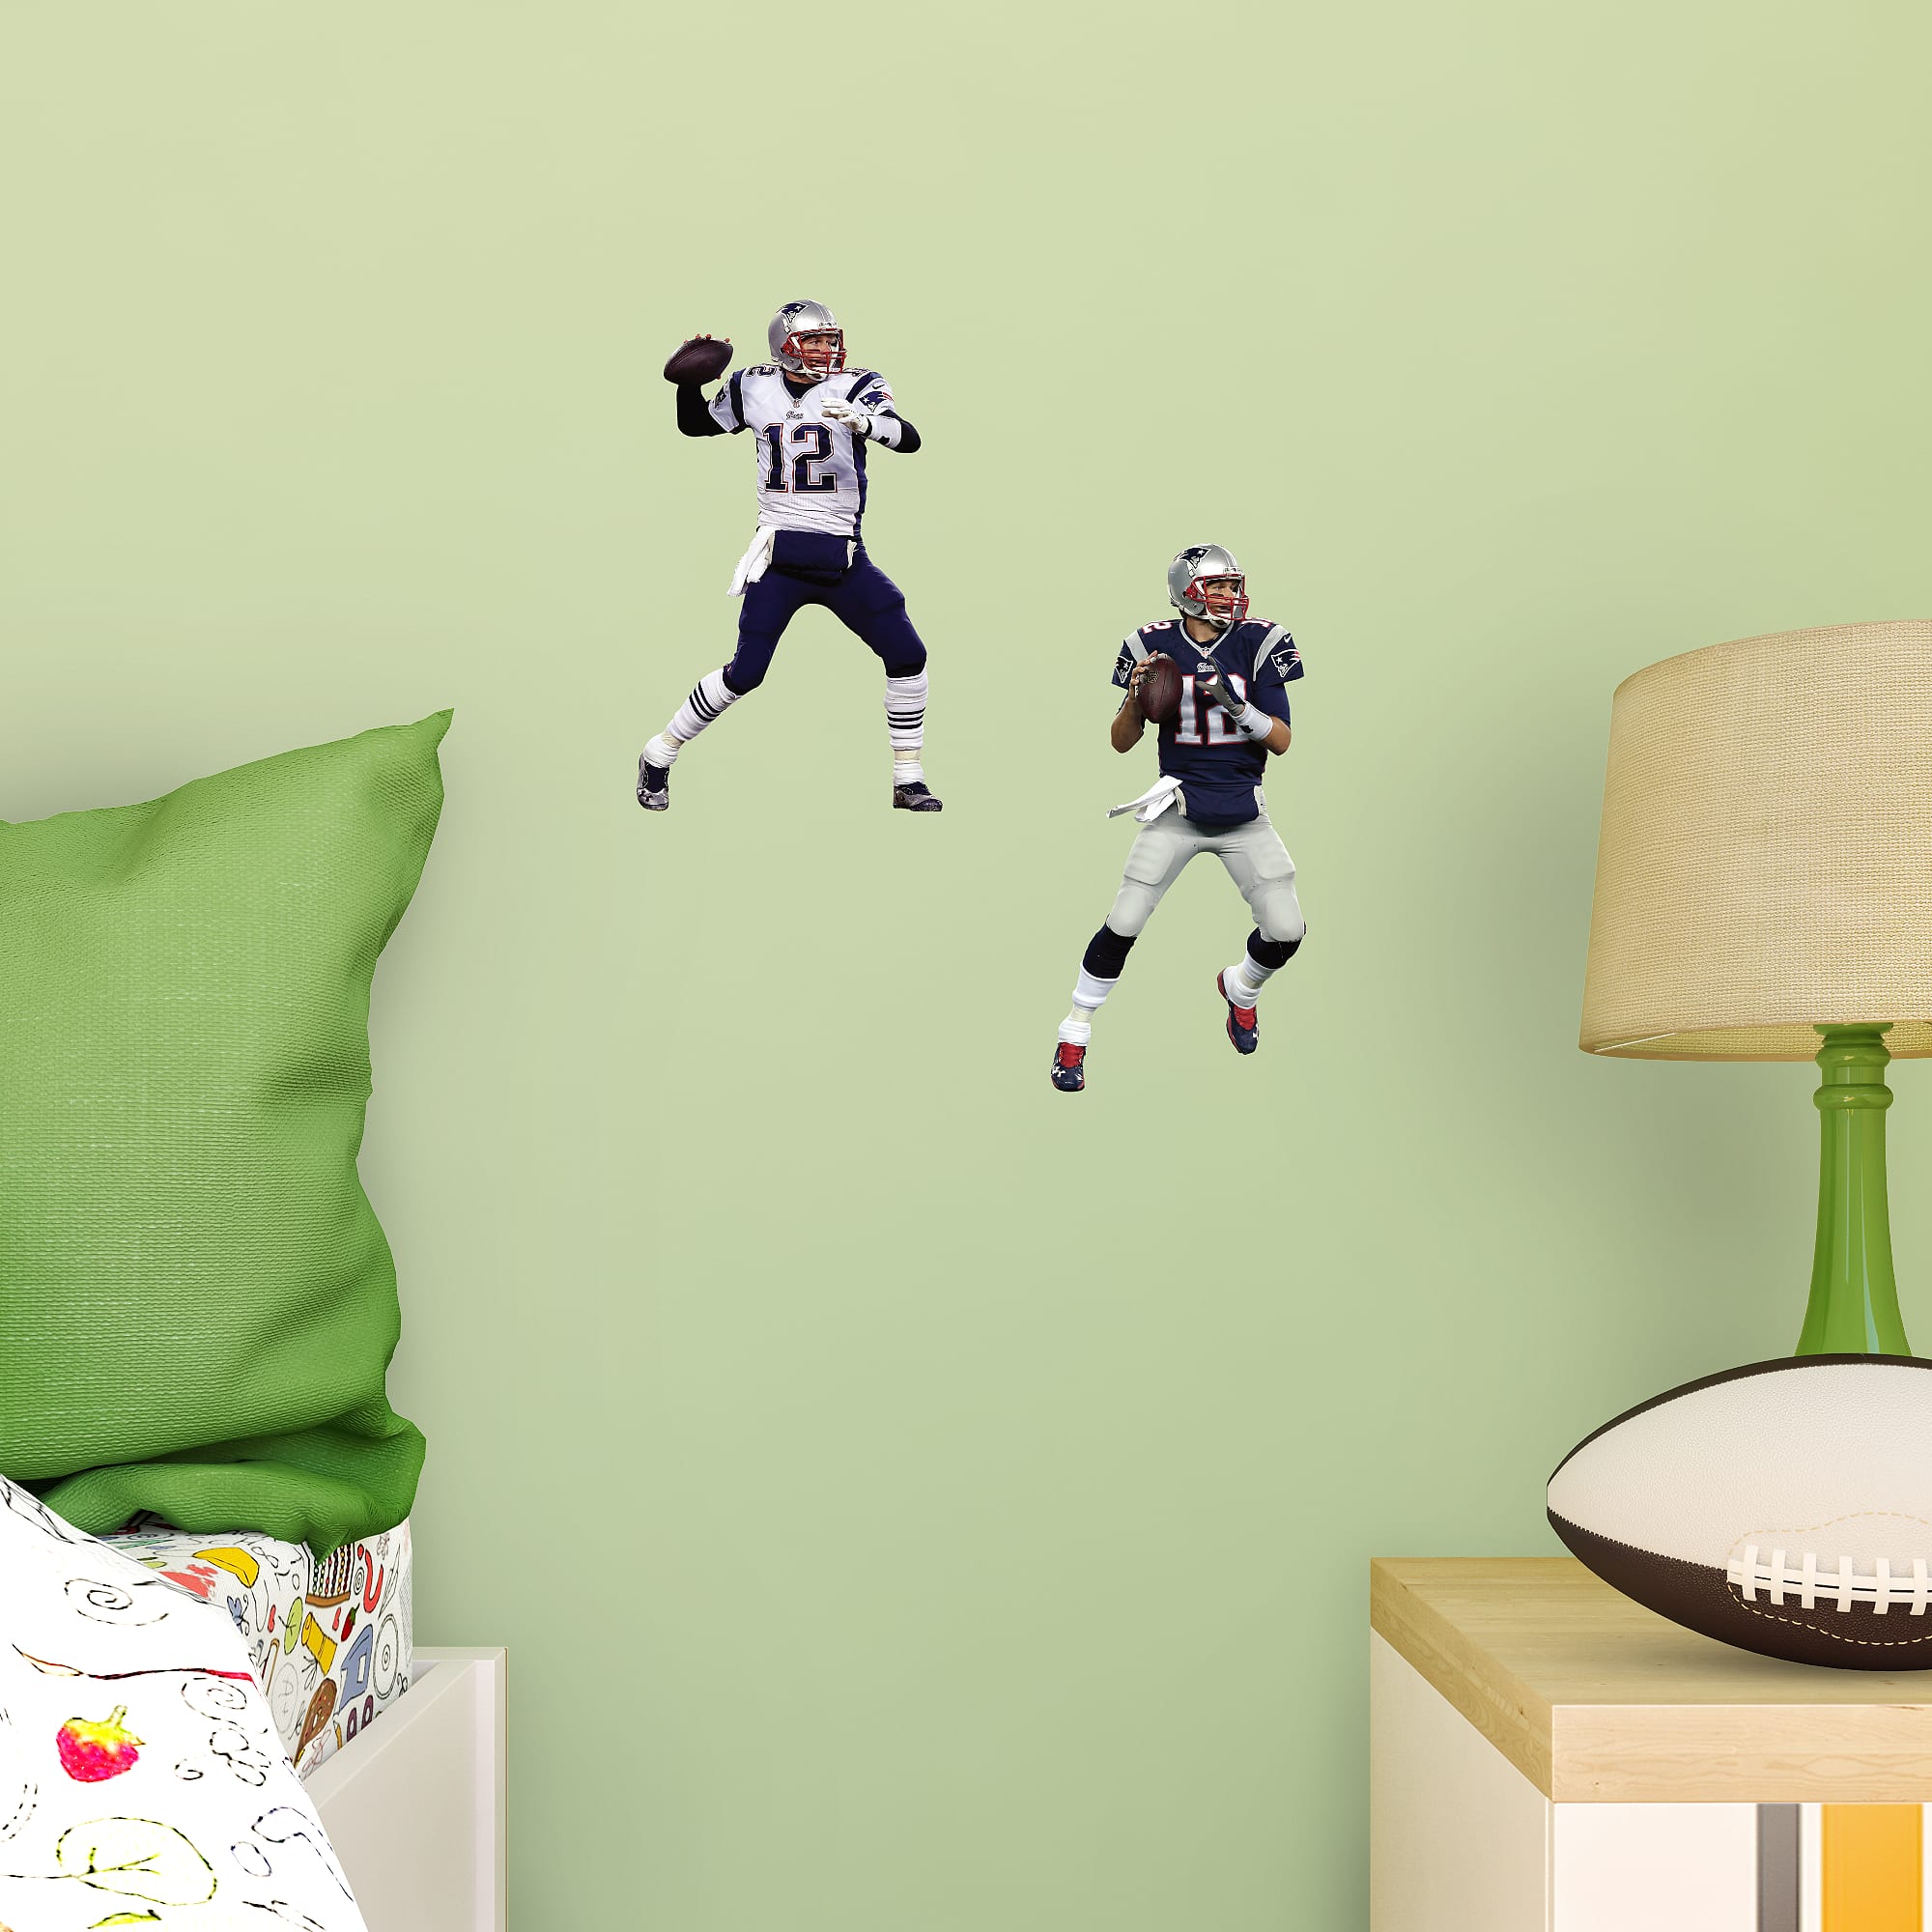 Tom Brady for New England Patriots: Home & Away - Officially Licensed NFL Removable Wall Decal 6.0"W x 12.0"H by Fathead | Vinyl